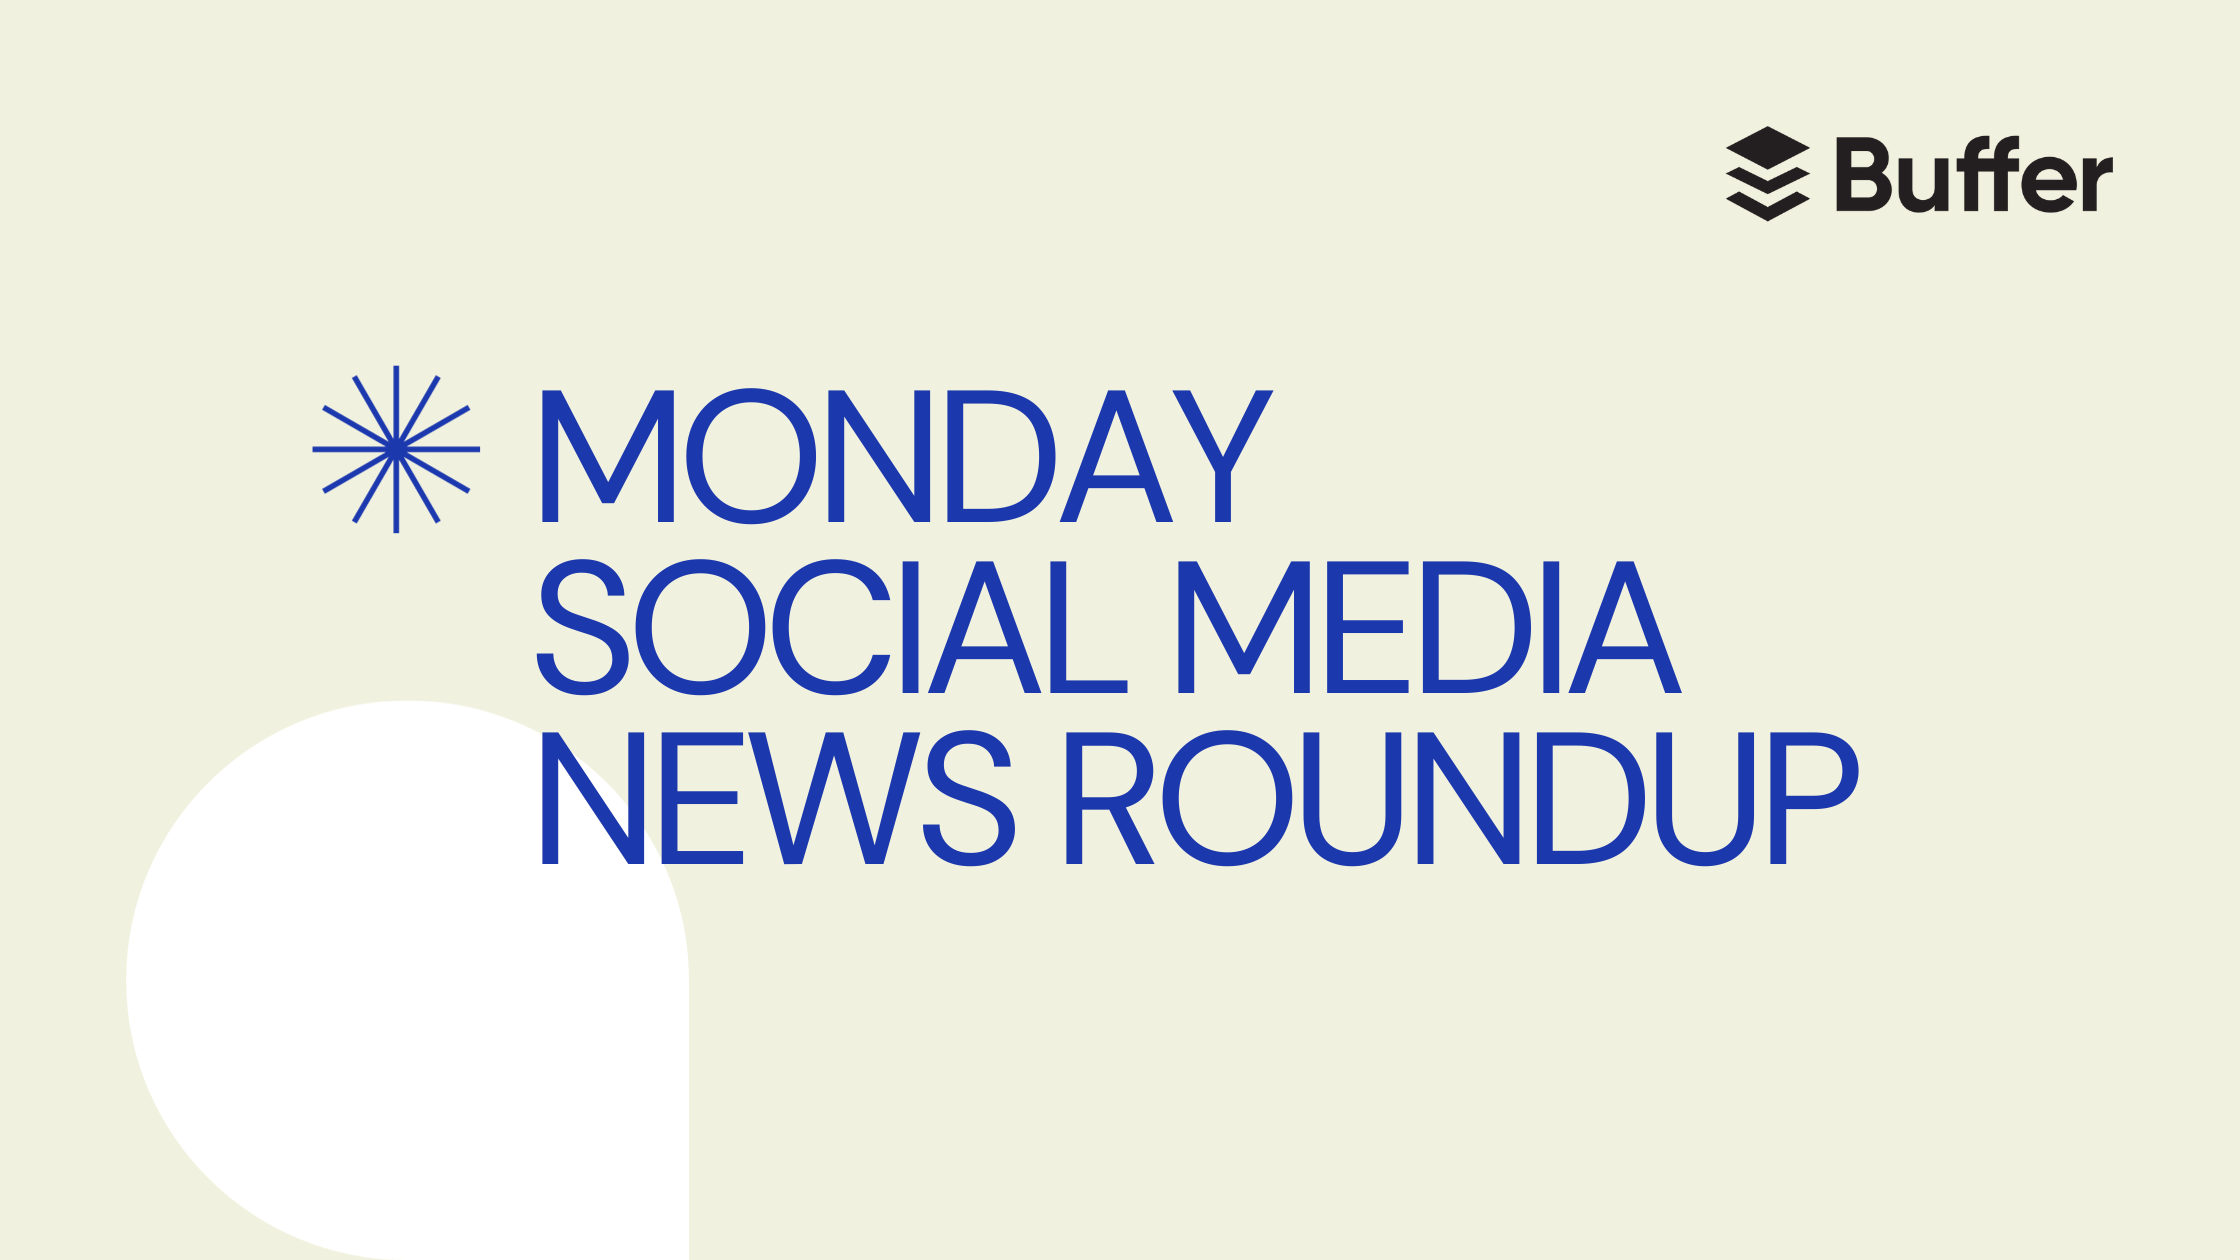 Meta's Launching Sassy Chatbots, Instagram Creates AI Stickers, And Twitter Axes Misinformation Reports: Monday Social Media News Roundup